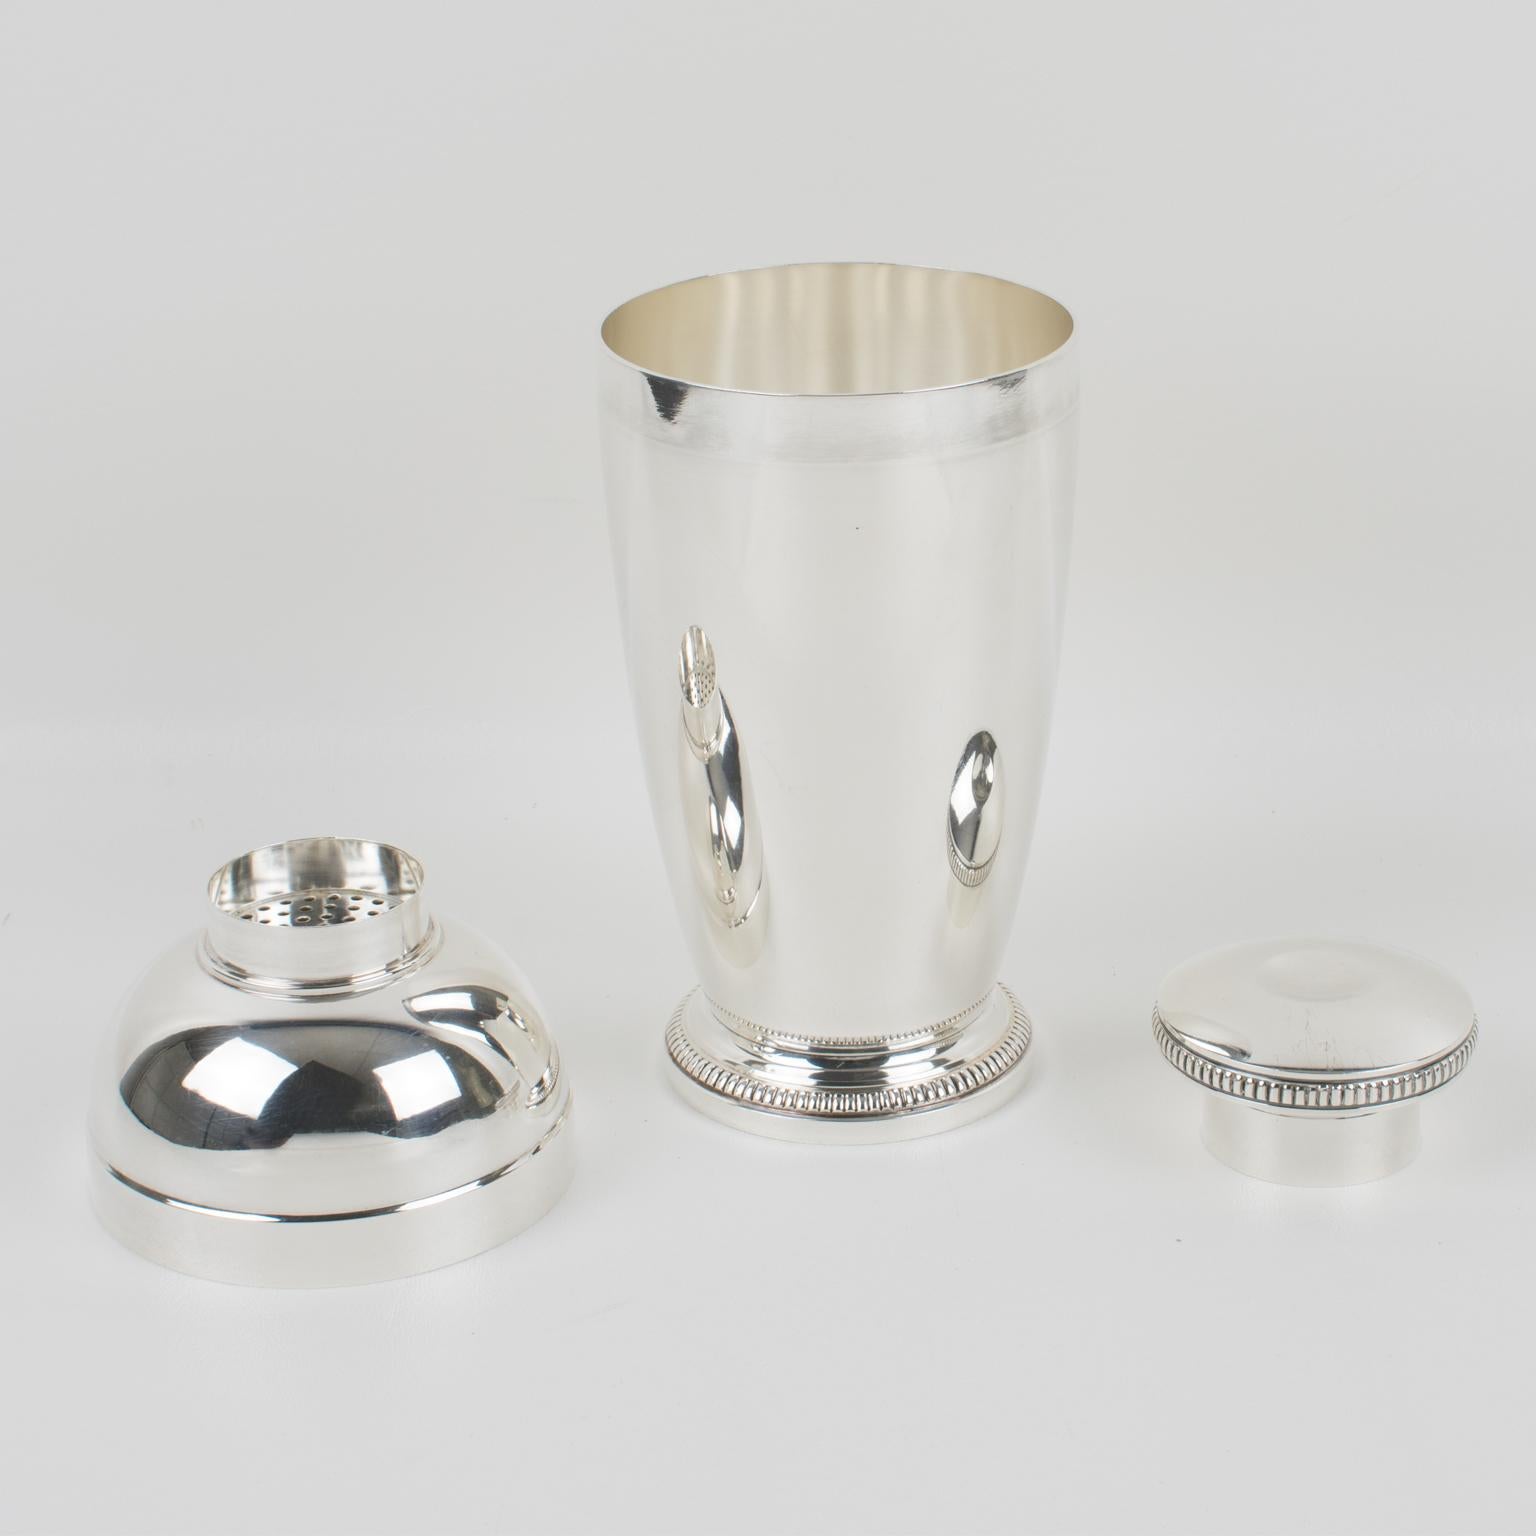 Elegant French Art Deco silver plate cylindrical cocktail or Martini shaker by silversmith Saint Medard, Paris. Three sectioned designed cocktail shaker with removable cap and strainer. Lovely Art Deco design with geometric bead beveling design